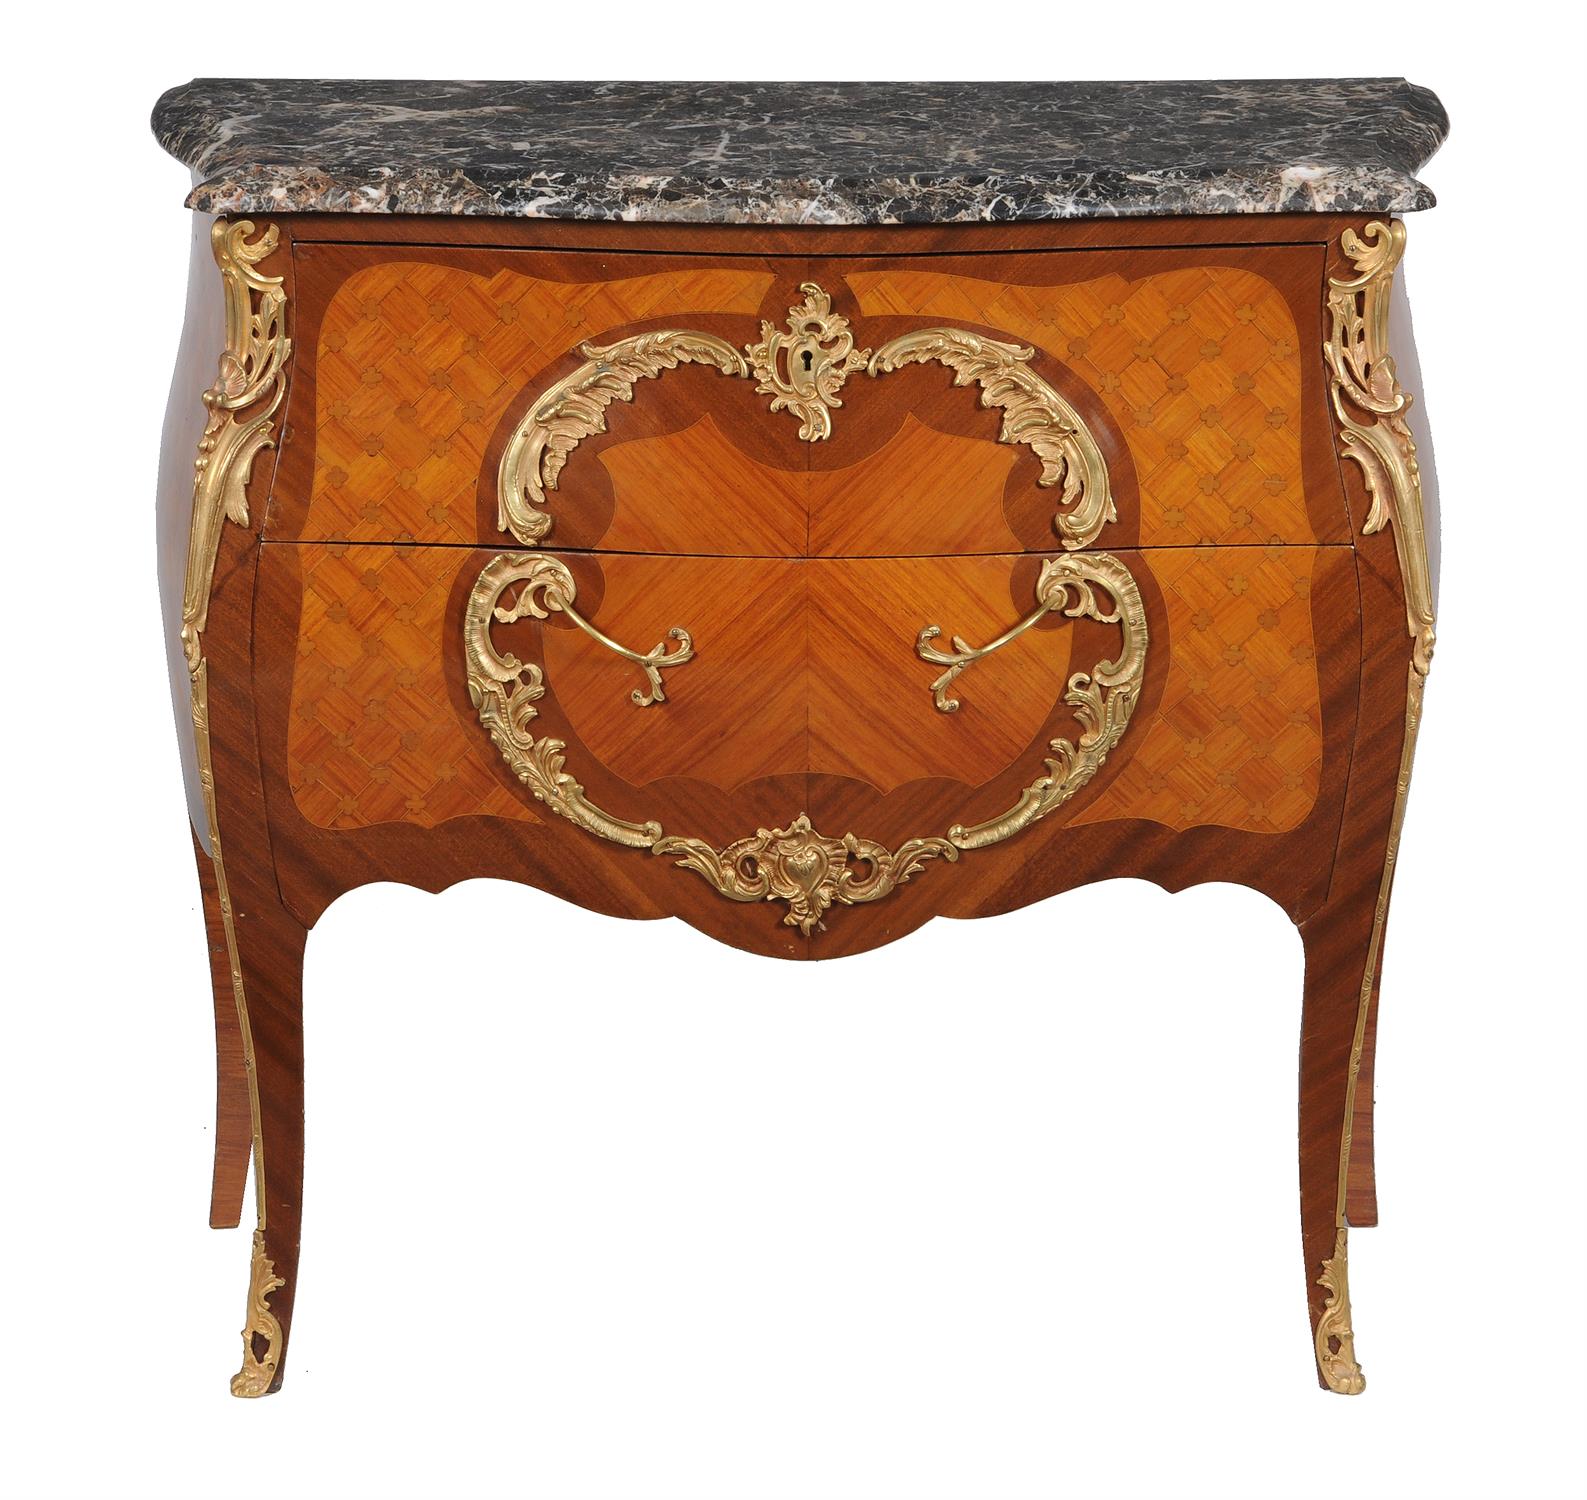 Y A French mahogany kingwood, parquetry, and gilt metal mounted commode in Louis XV style - Image 2 of 3